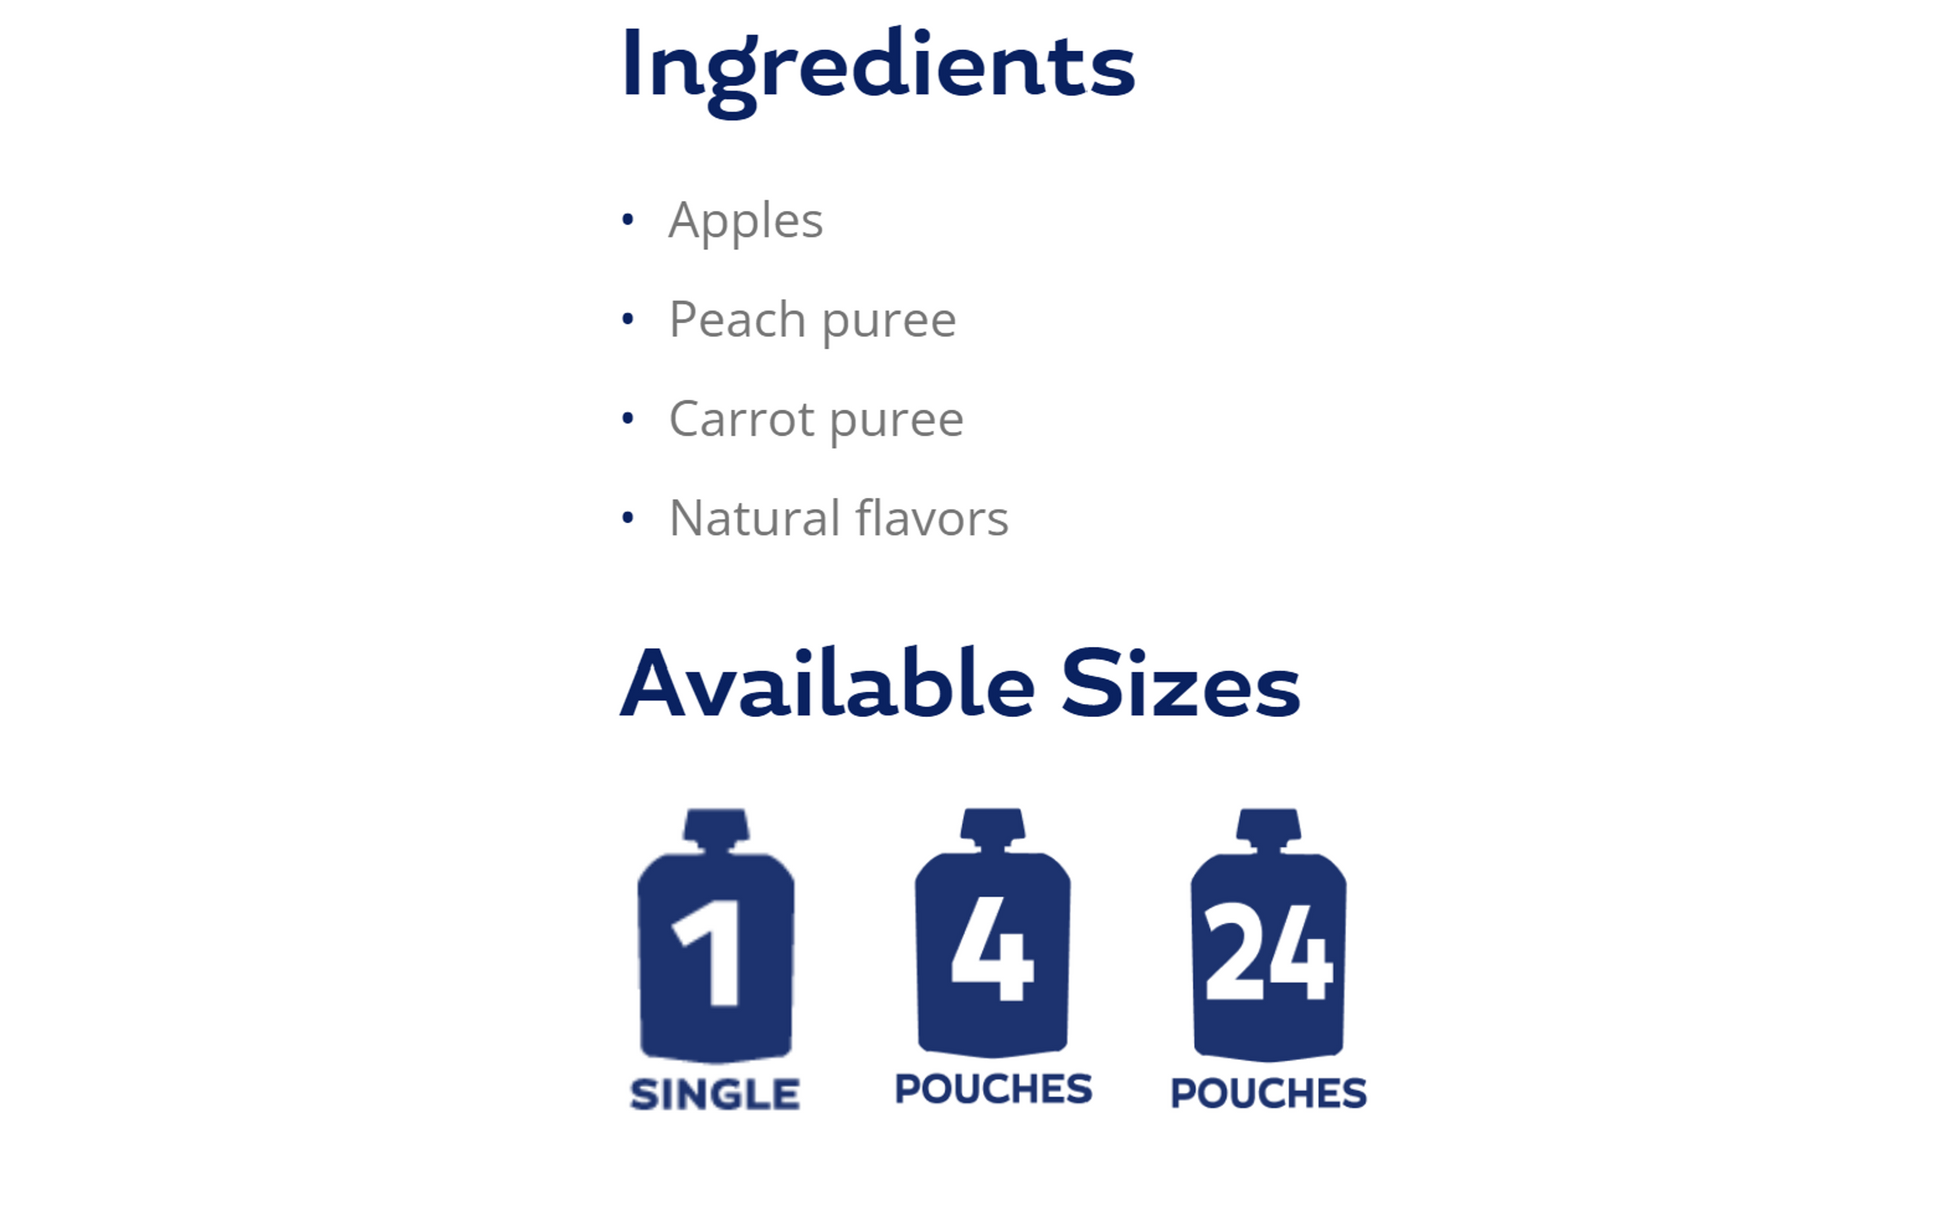 Simple ingredients and available sizes of Buddy Fruits Peach, Carrot, & Apple fruit & veggies pouch.